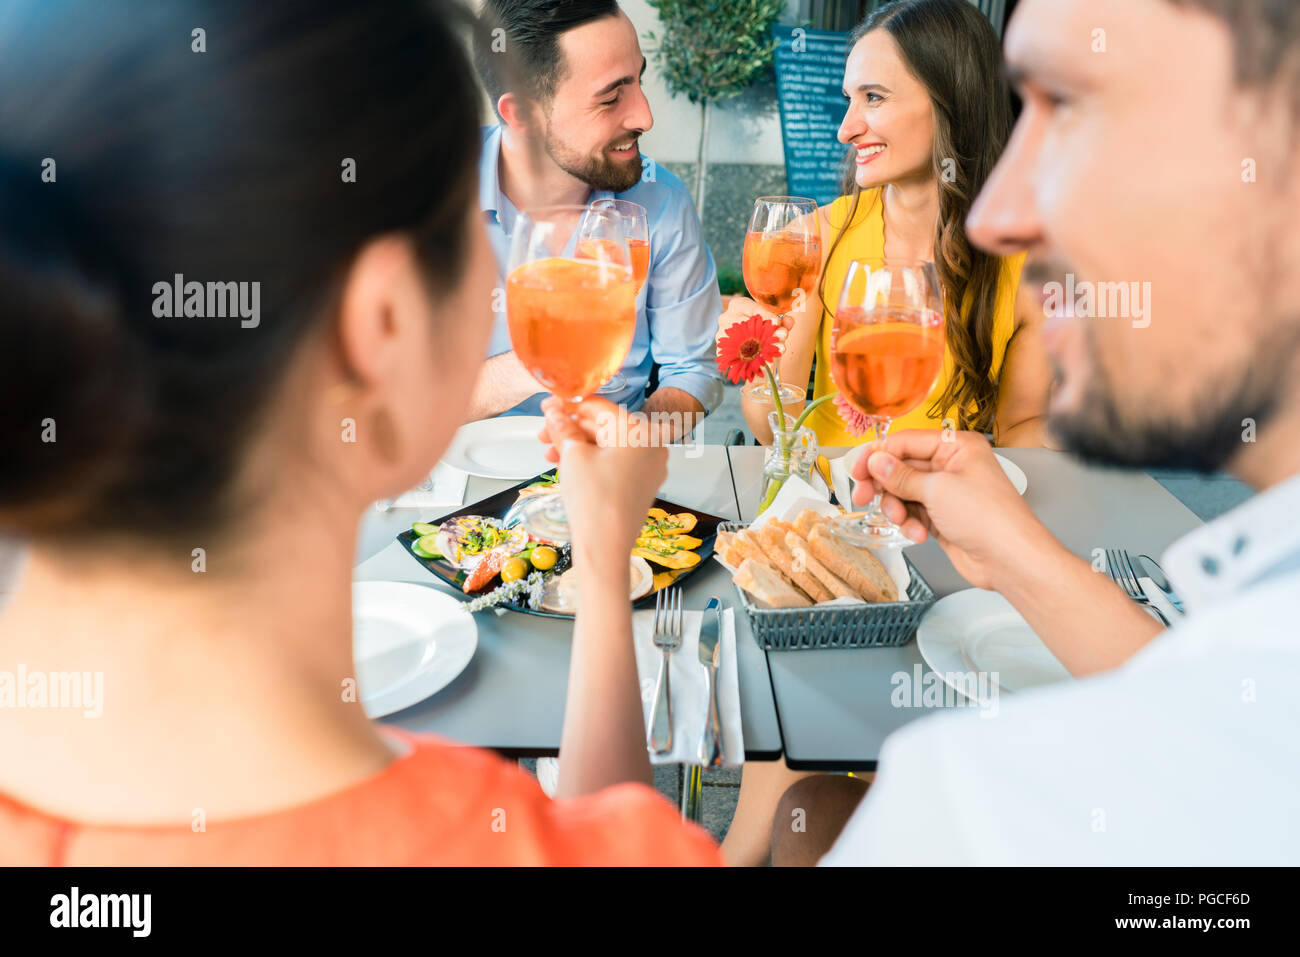 Two happy young couples toasting while sitting together at restaurant Stock Photo